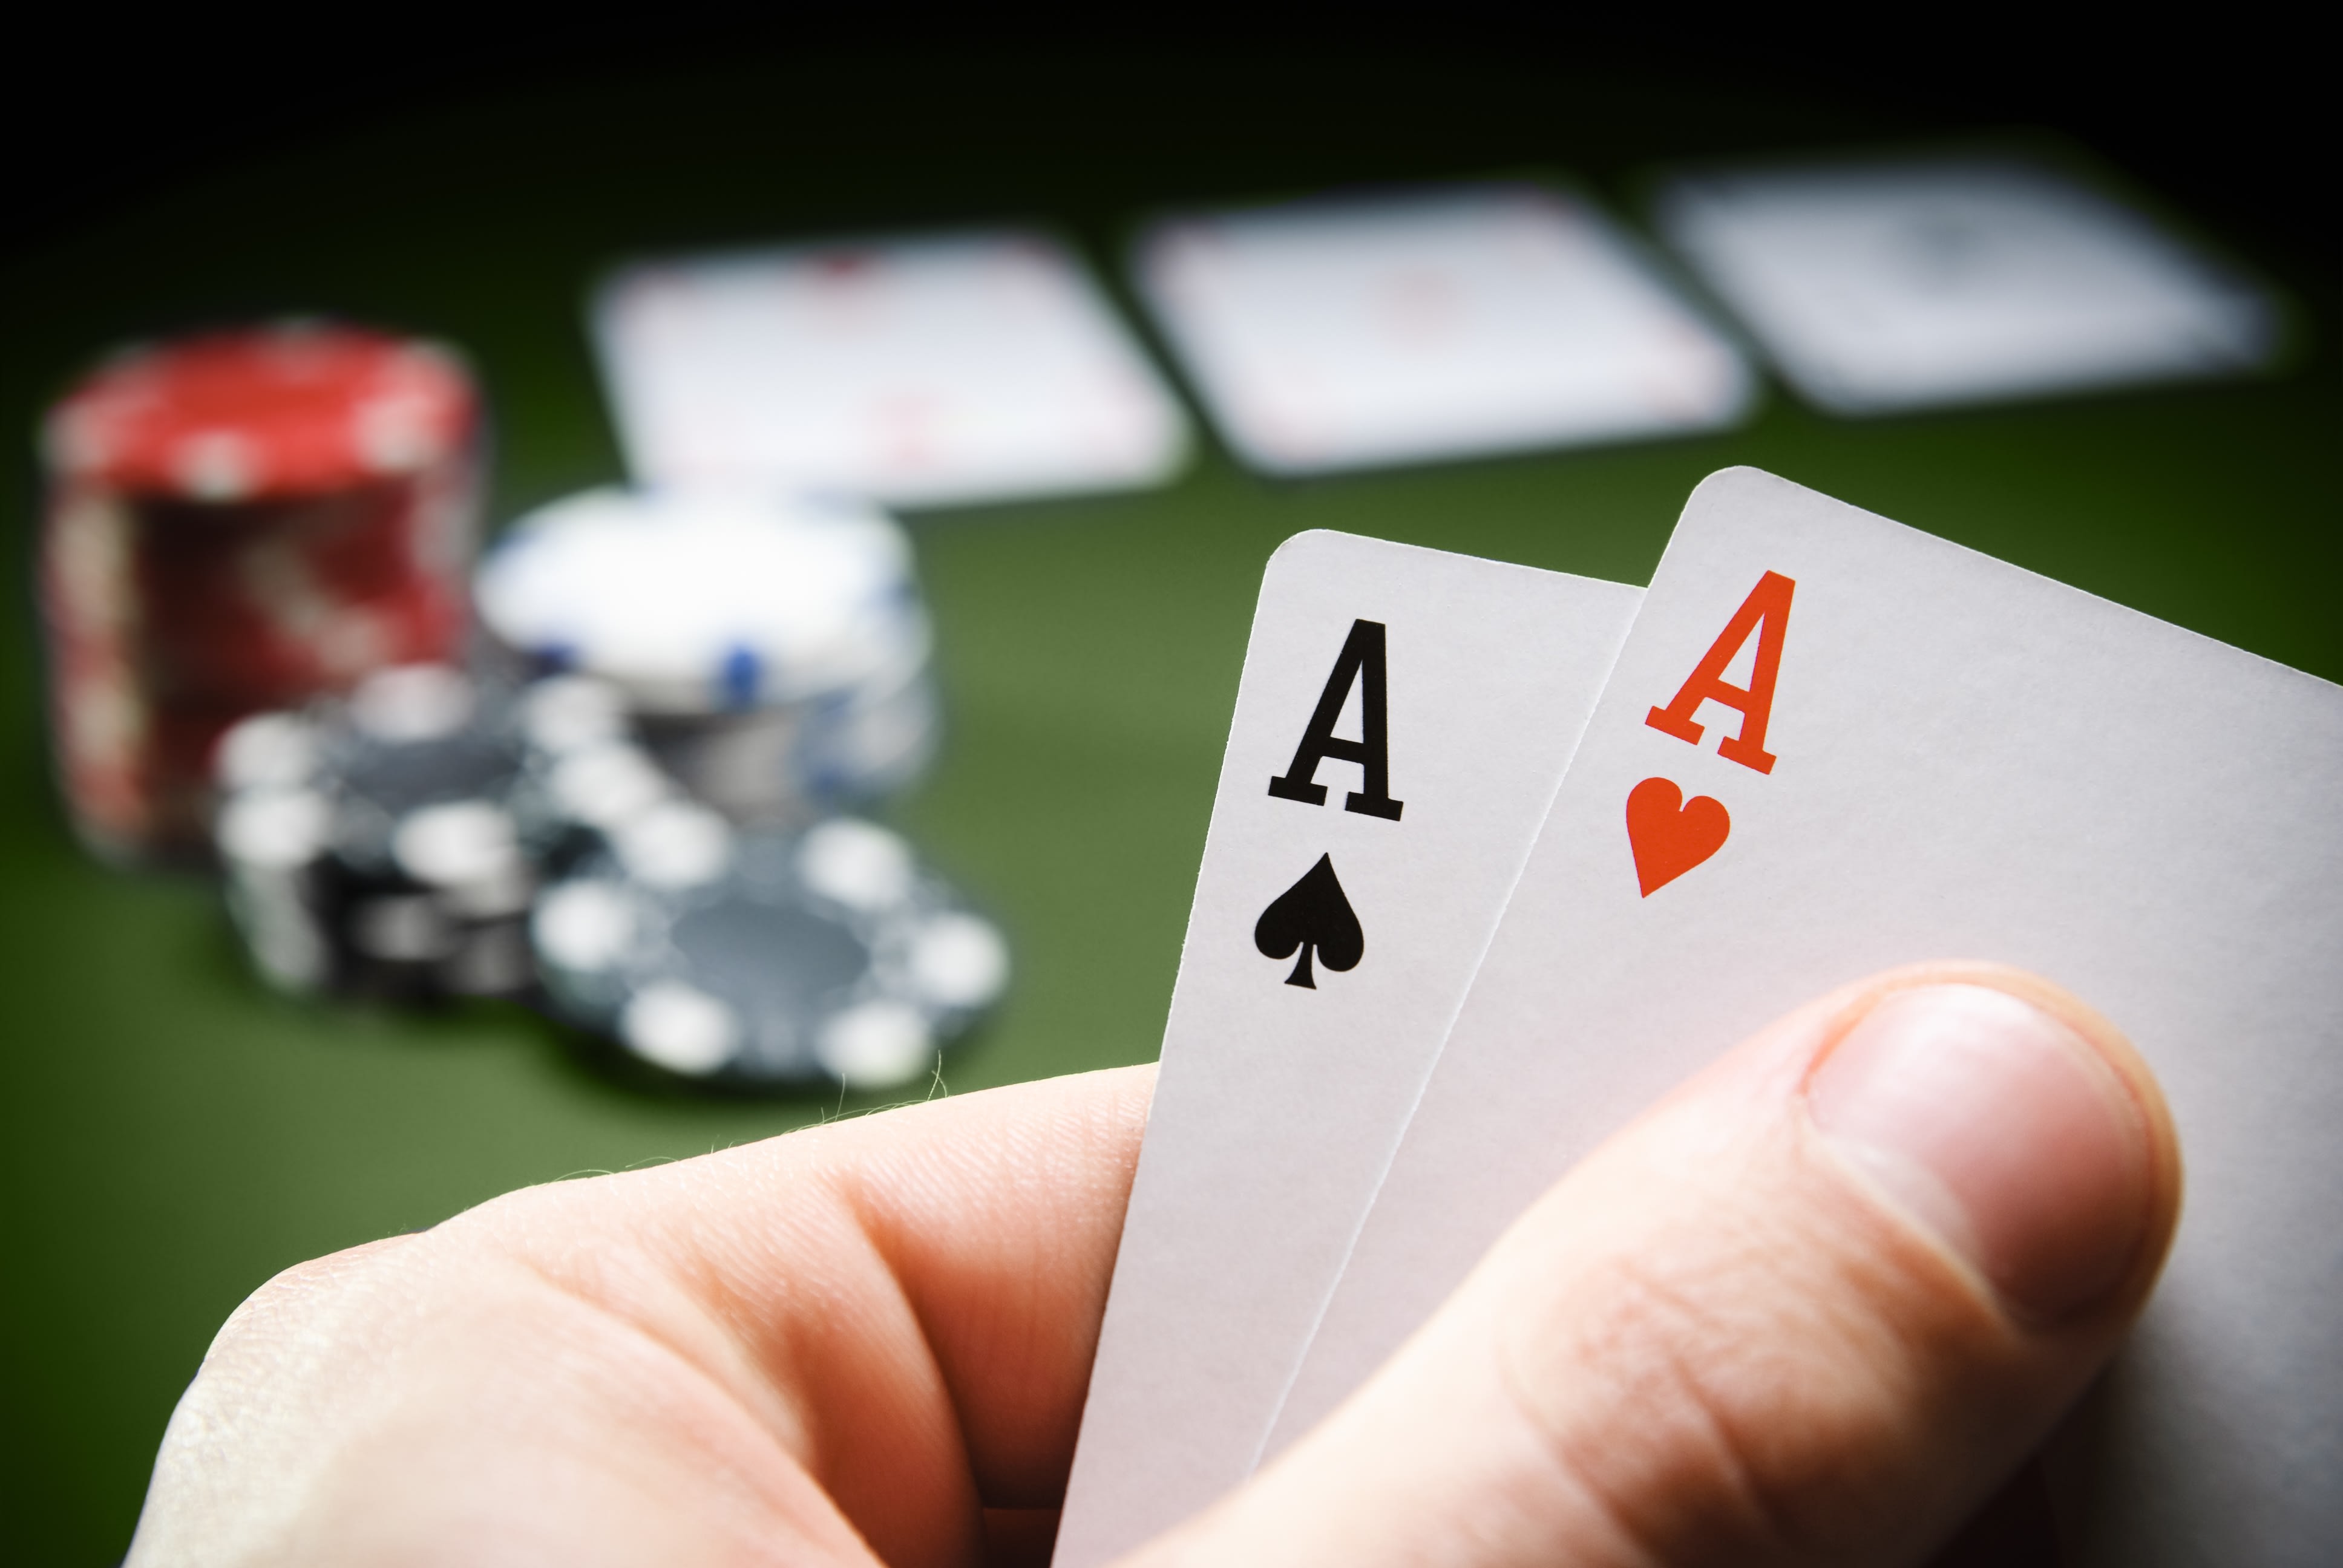 Poker Set Up: Hosting the Perfect Poker Home Game